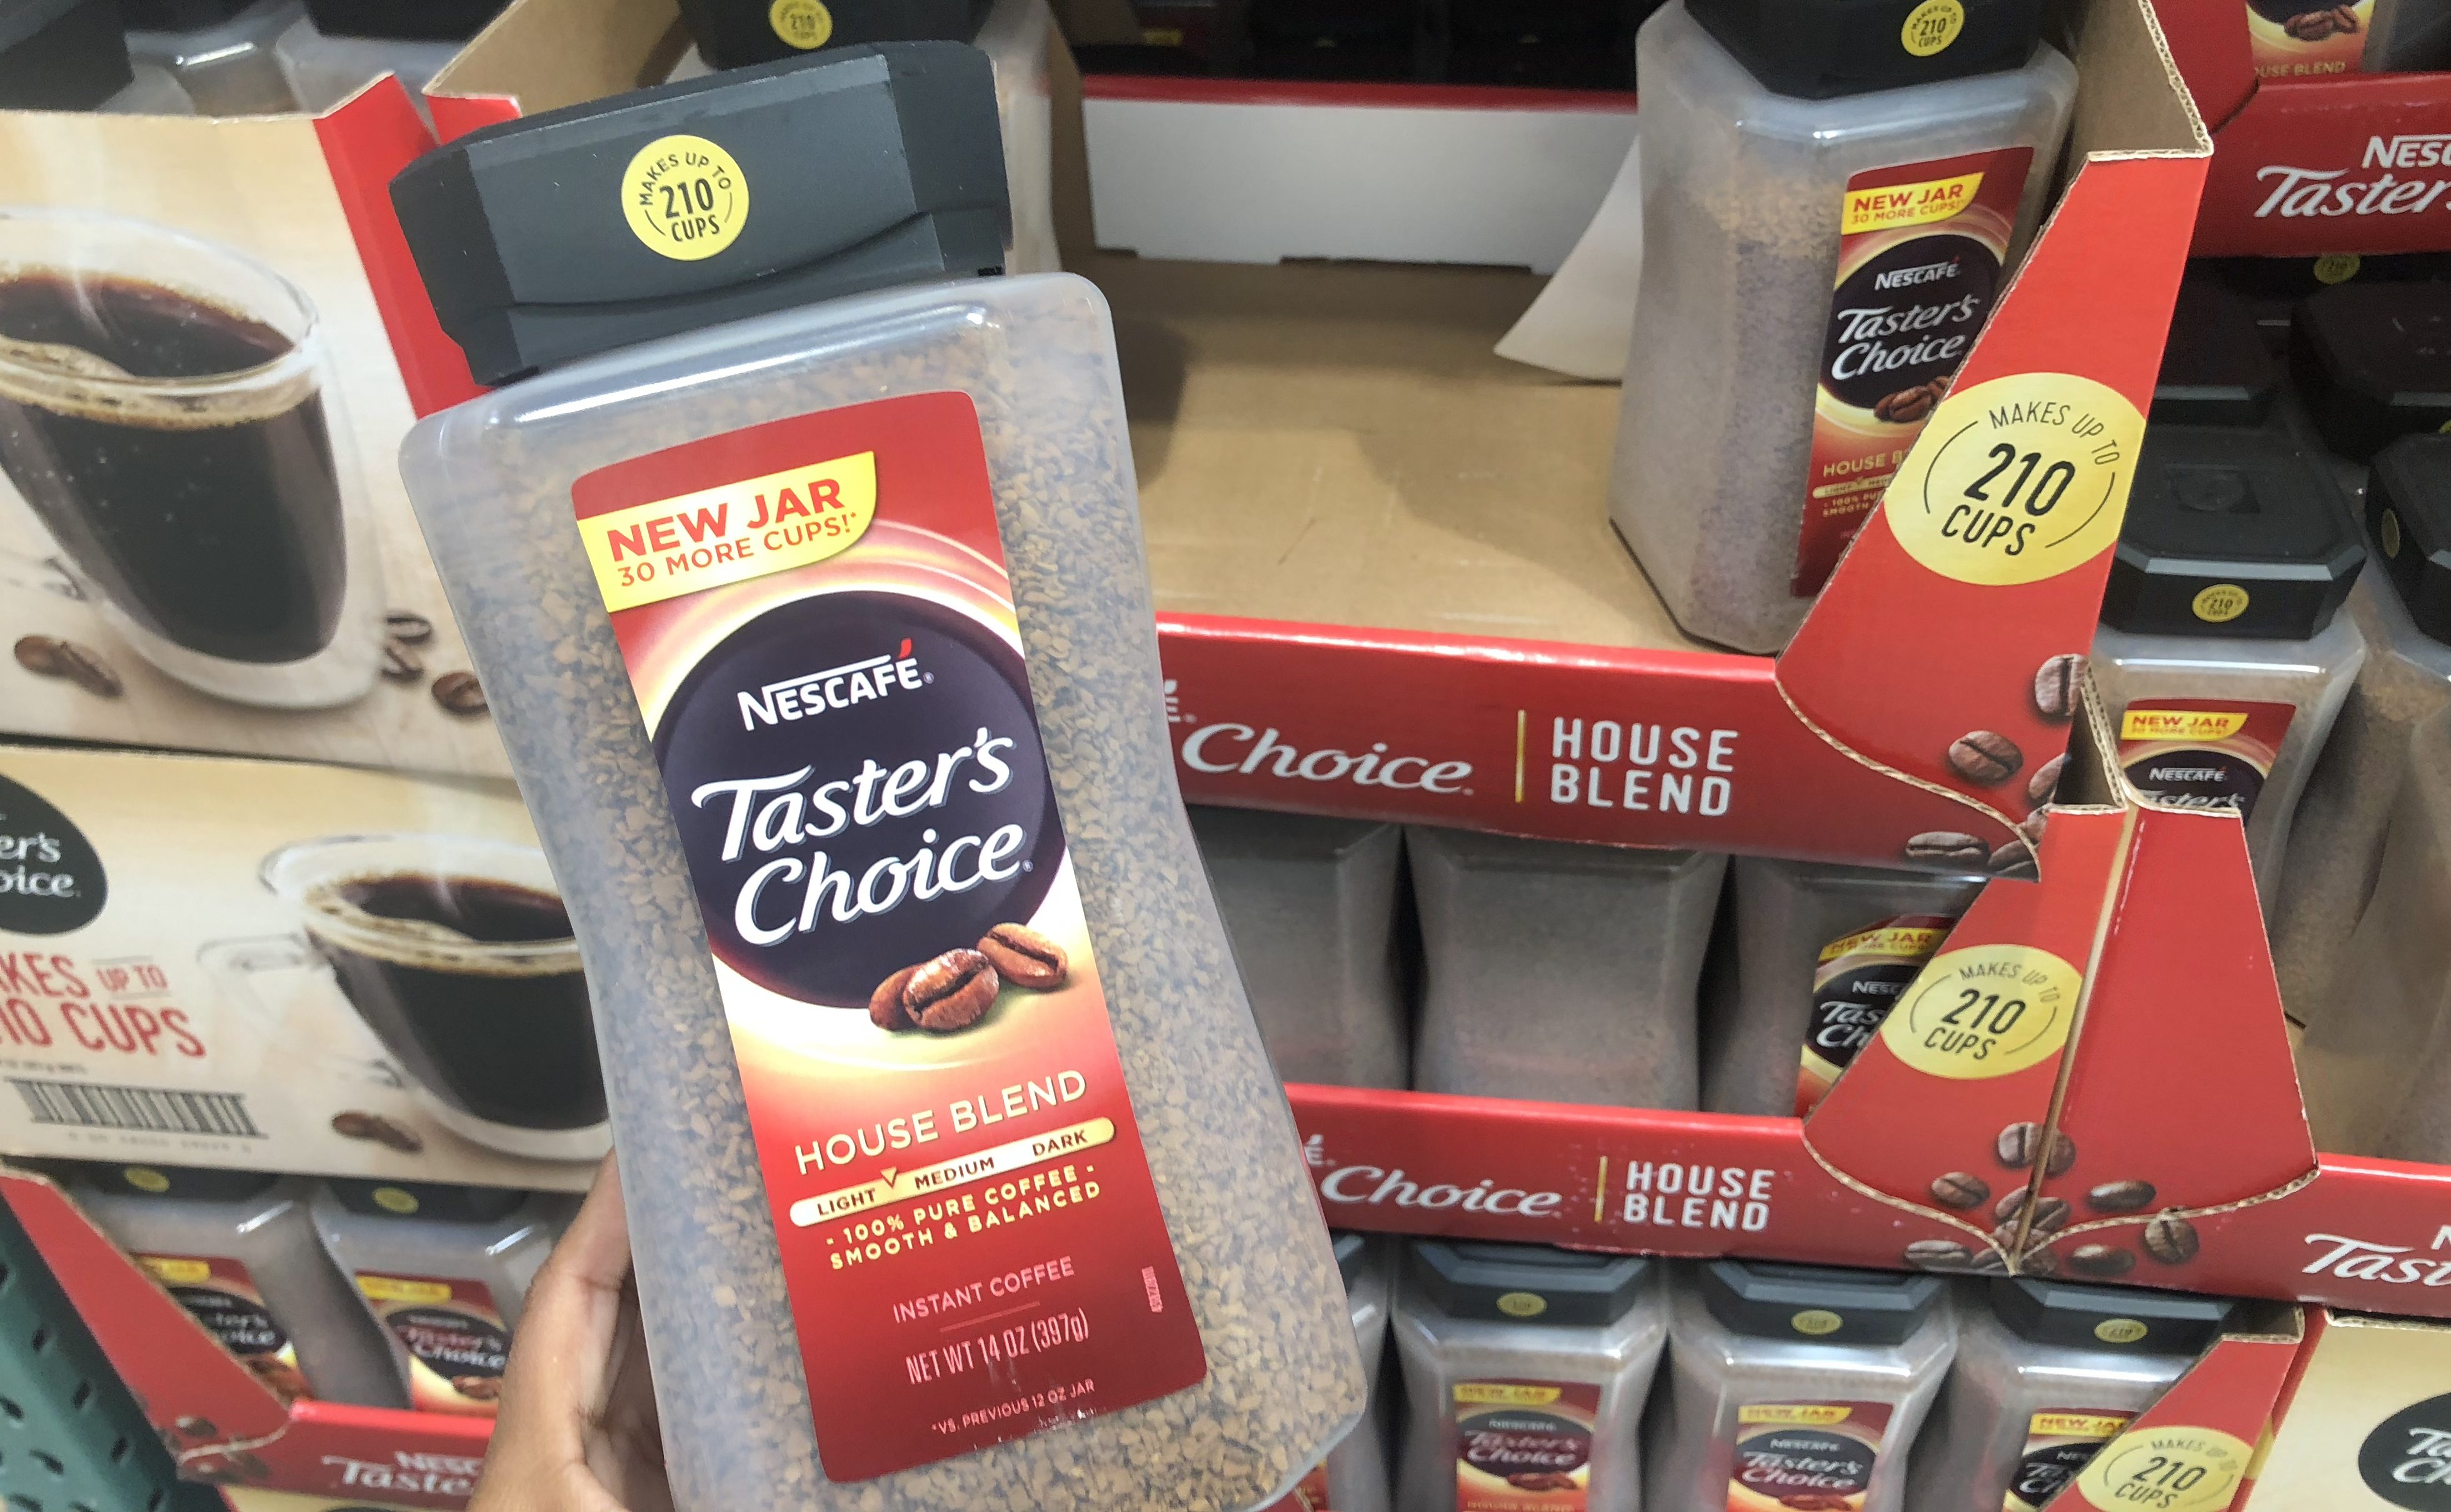 Costco Monthly Deals for September 2018 - Taster's Choice at Costco